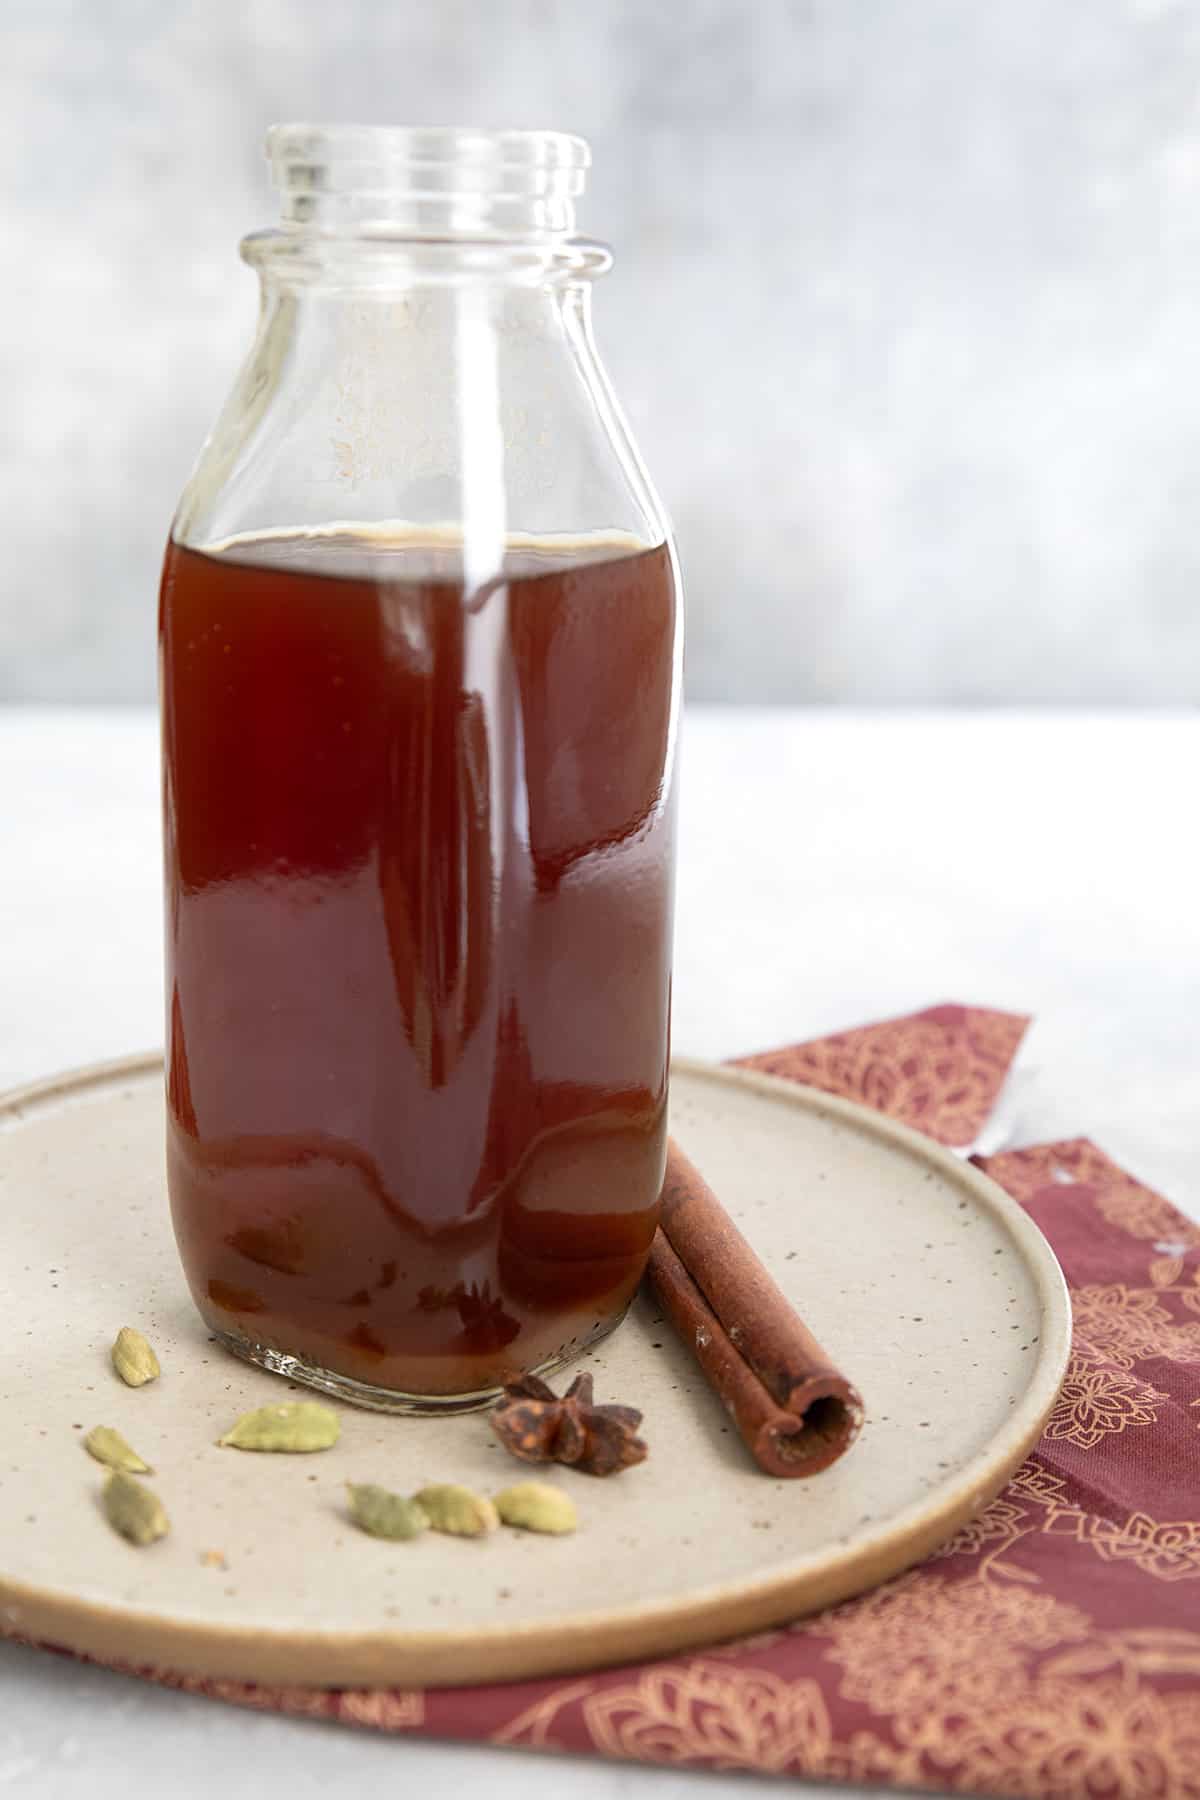 A bottle of keto chai concentrate on a rustic plate over a white wooden table, with cardamom pods and cinnamon sticks.